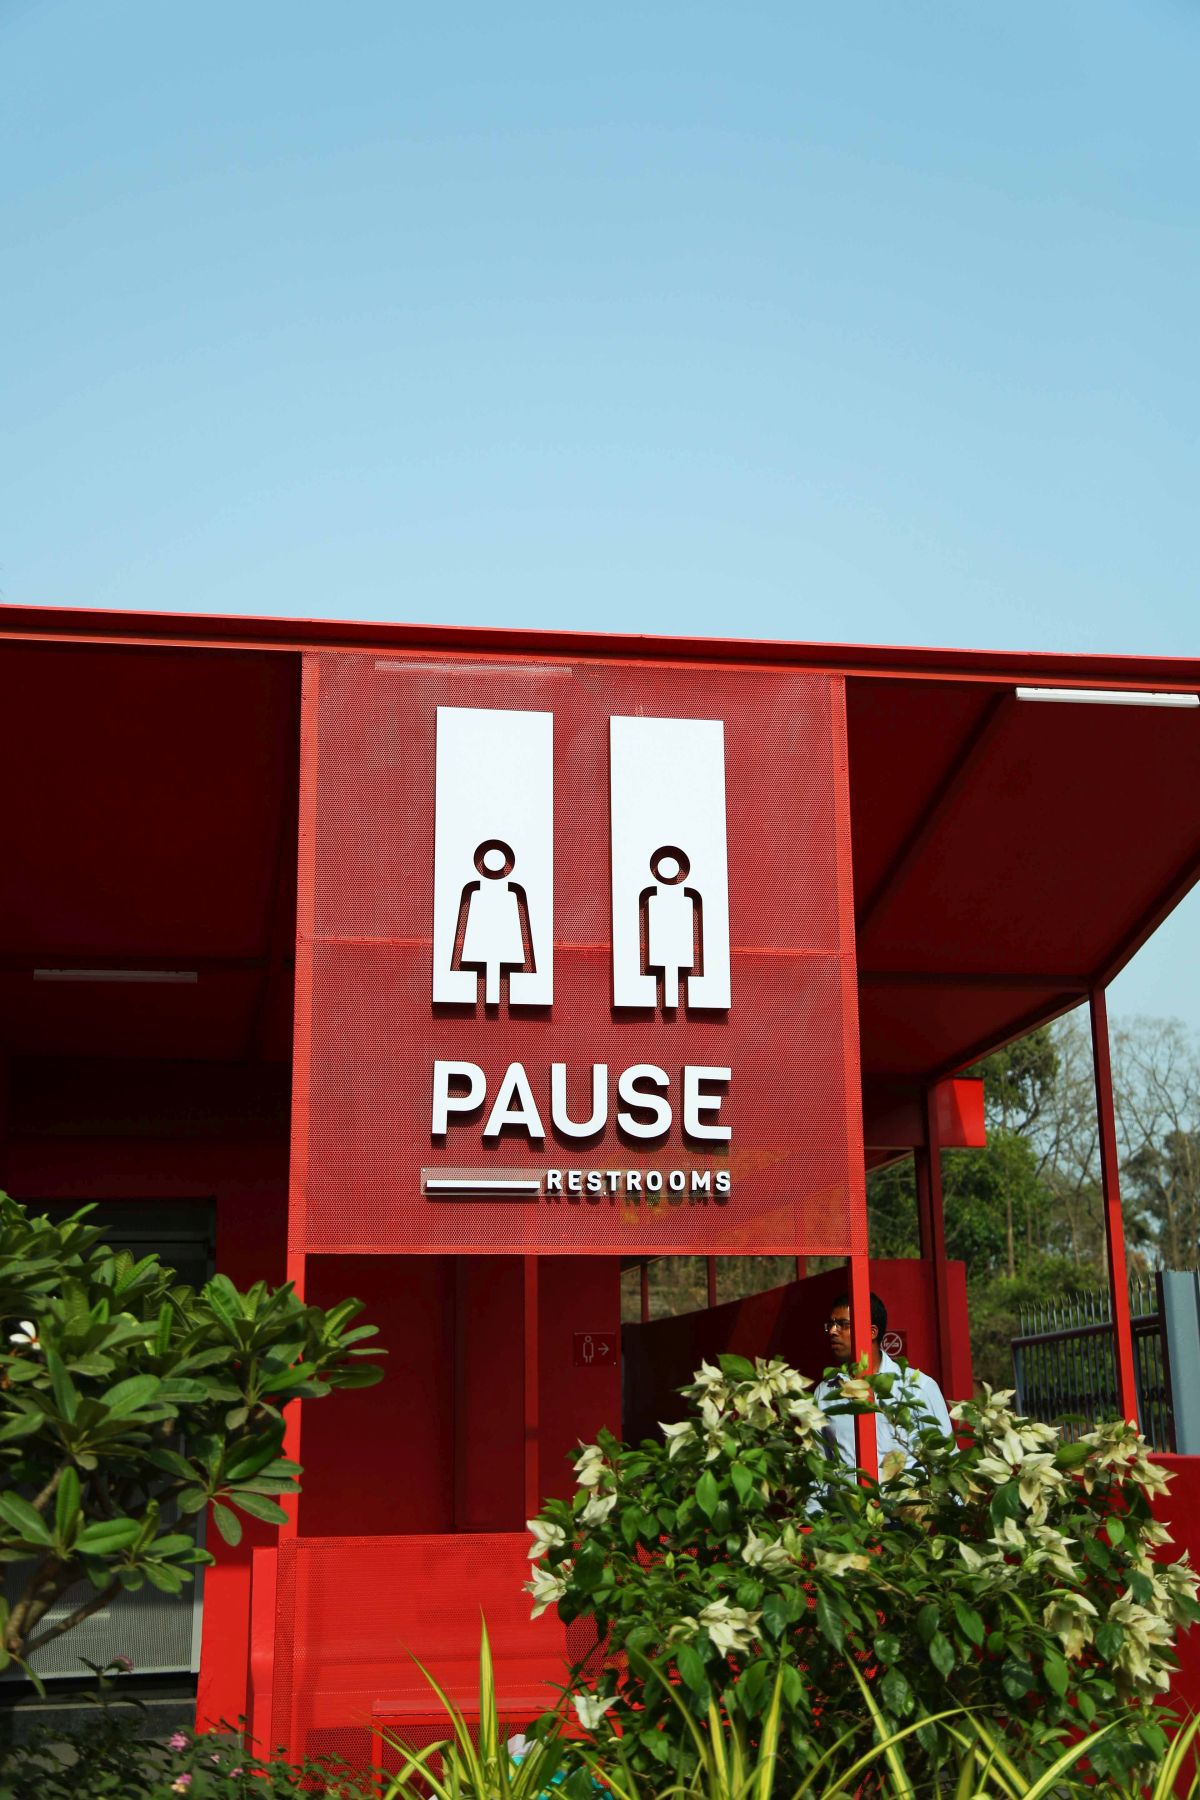 Pause - Restrooms, at Bombay-Goa Highway, by RC Architects 59